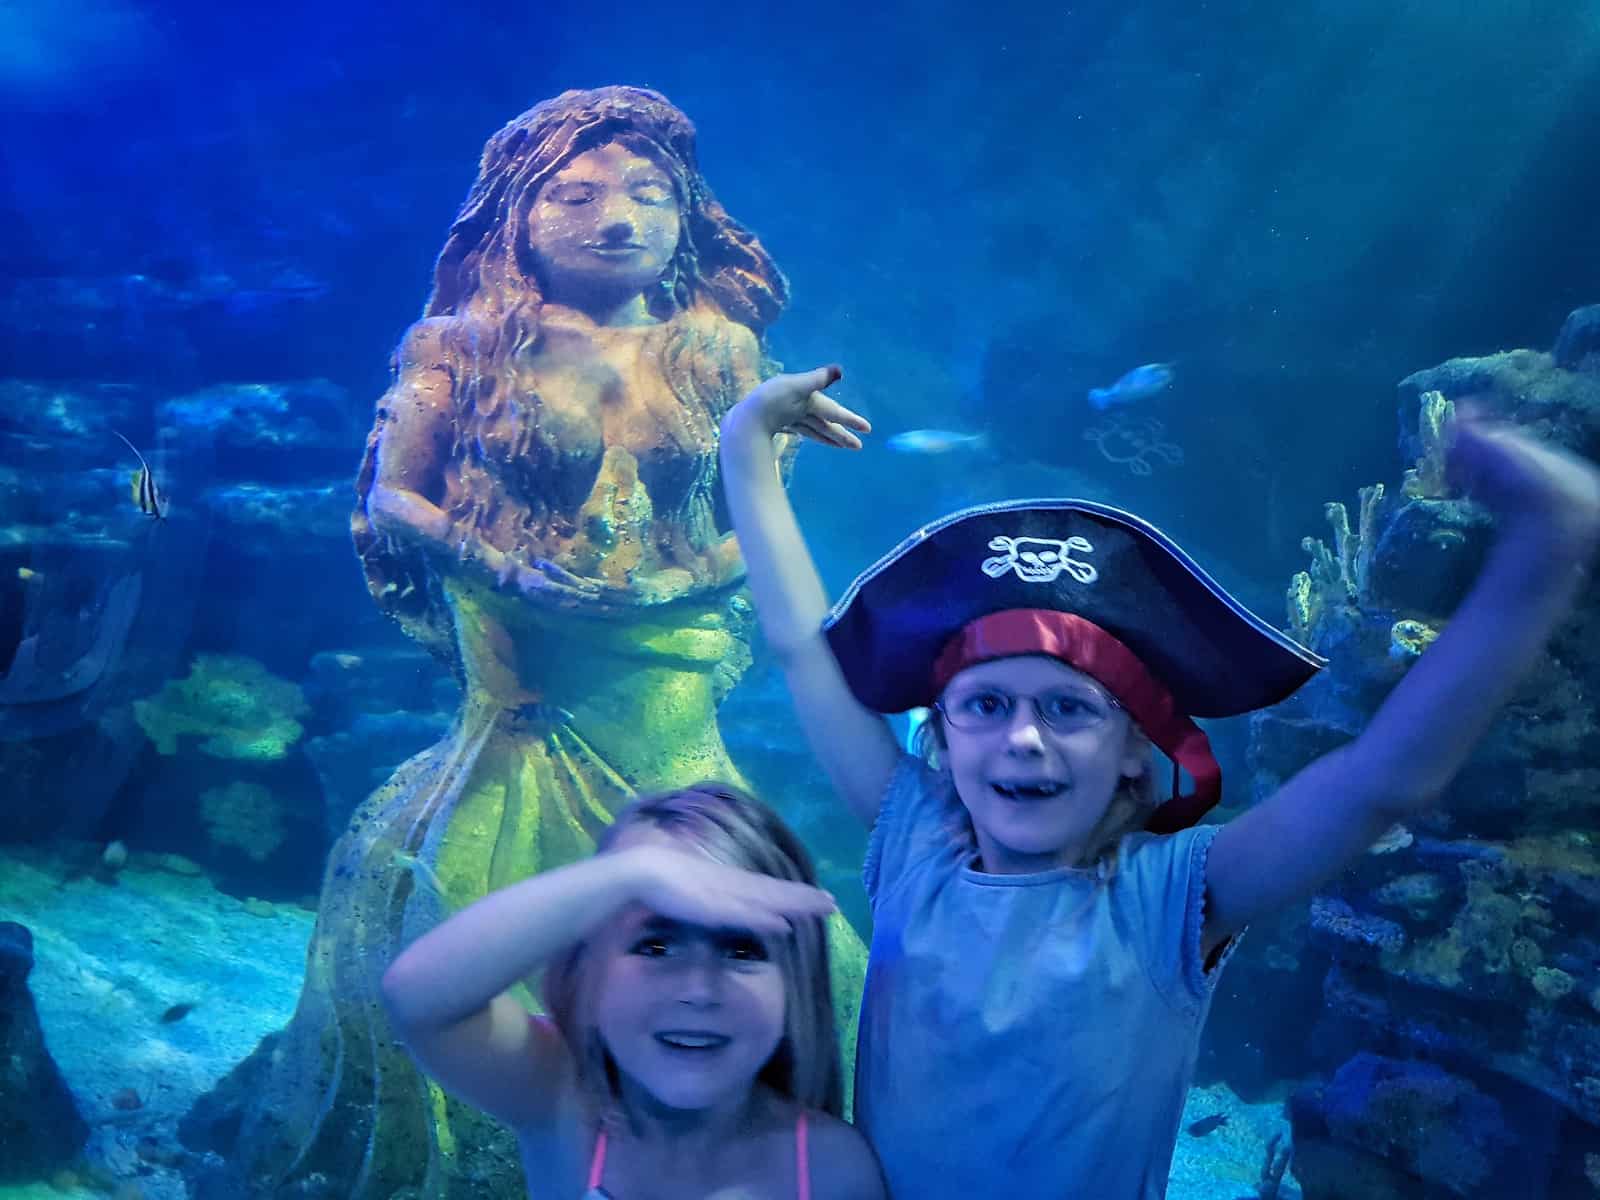 Pirates and Mermaids at the National Sea Life Centre Birmingham